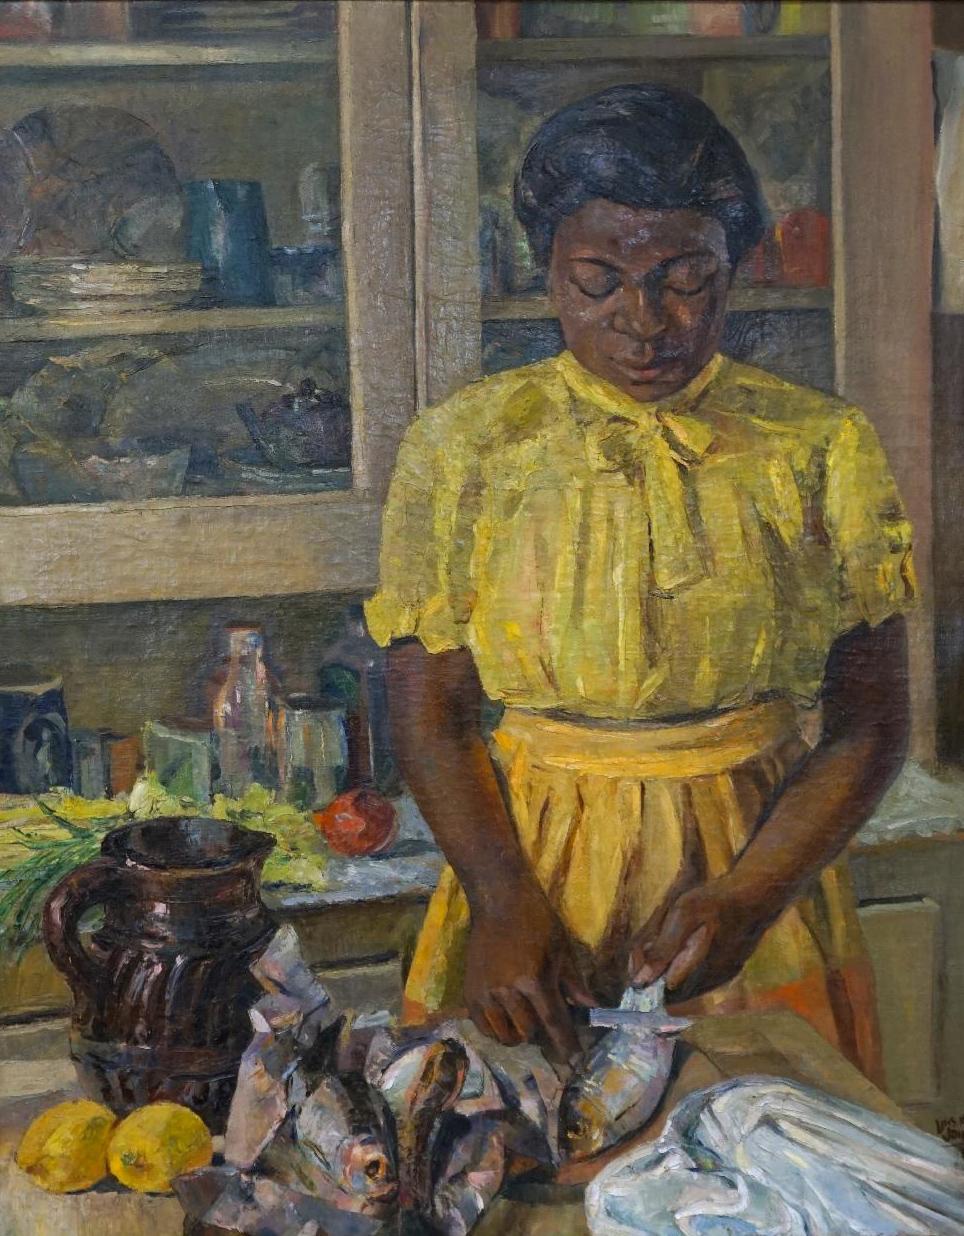 Painting of a girl in a yellow dress standing in a kitchen cutting fish